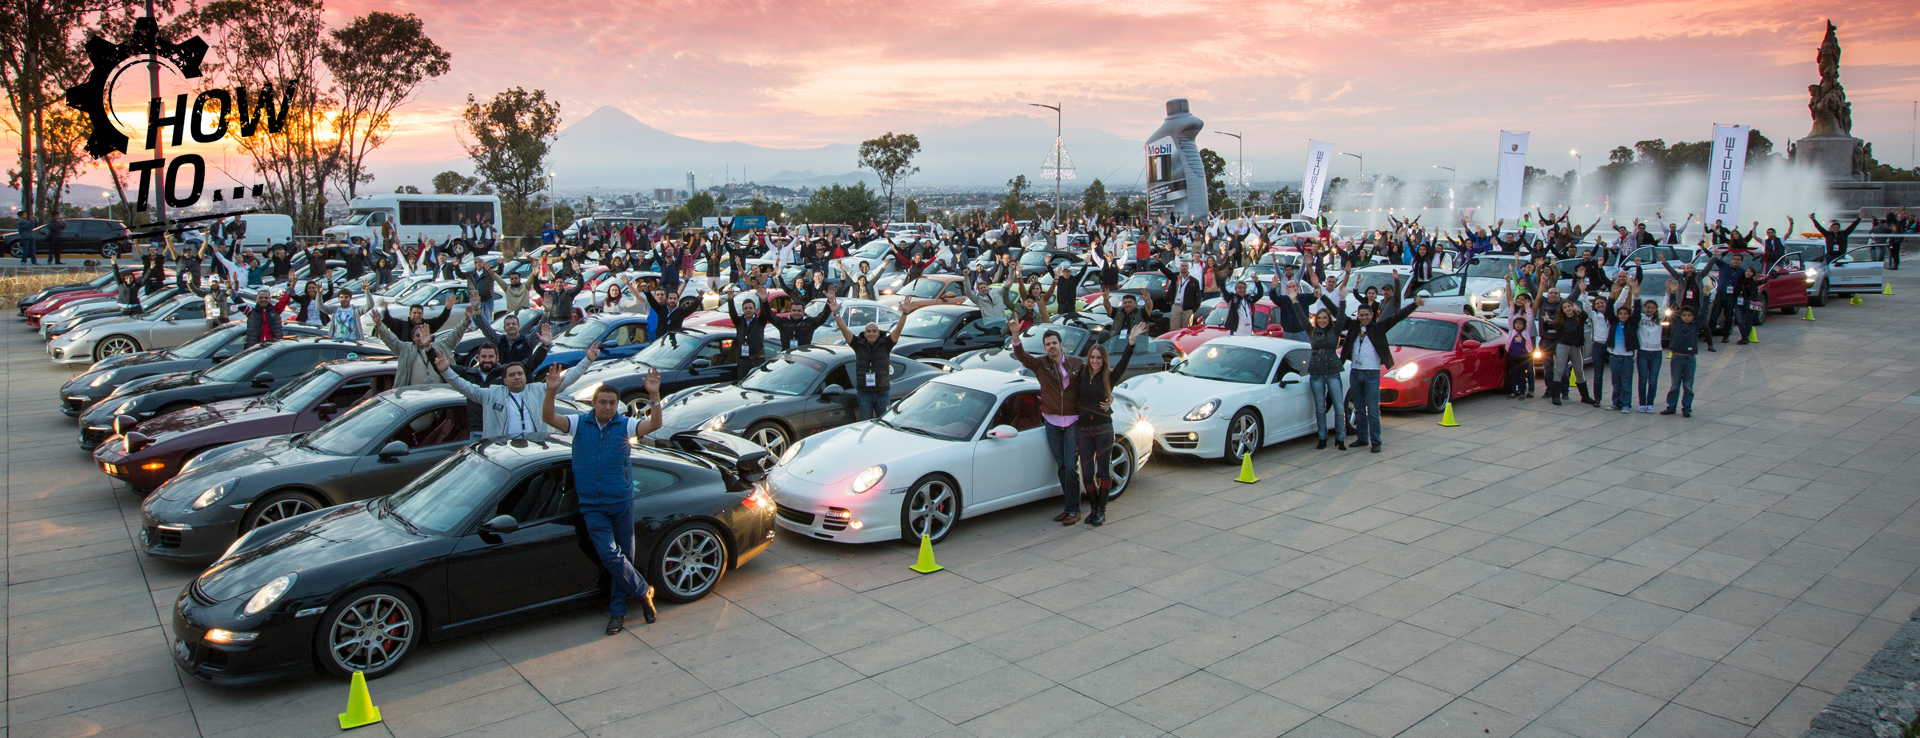 Many Porsche Club Mexico members and their cars waving